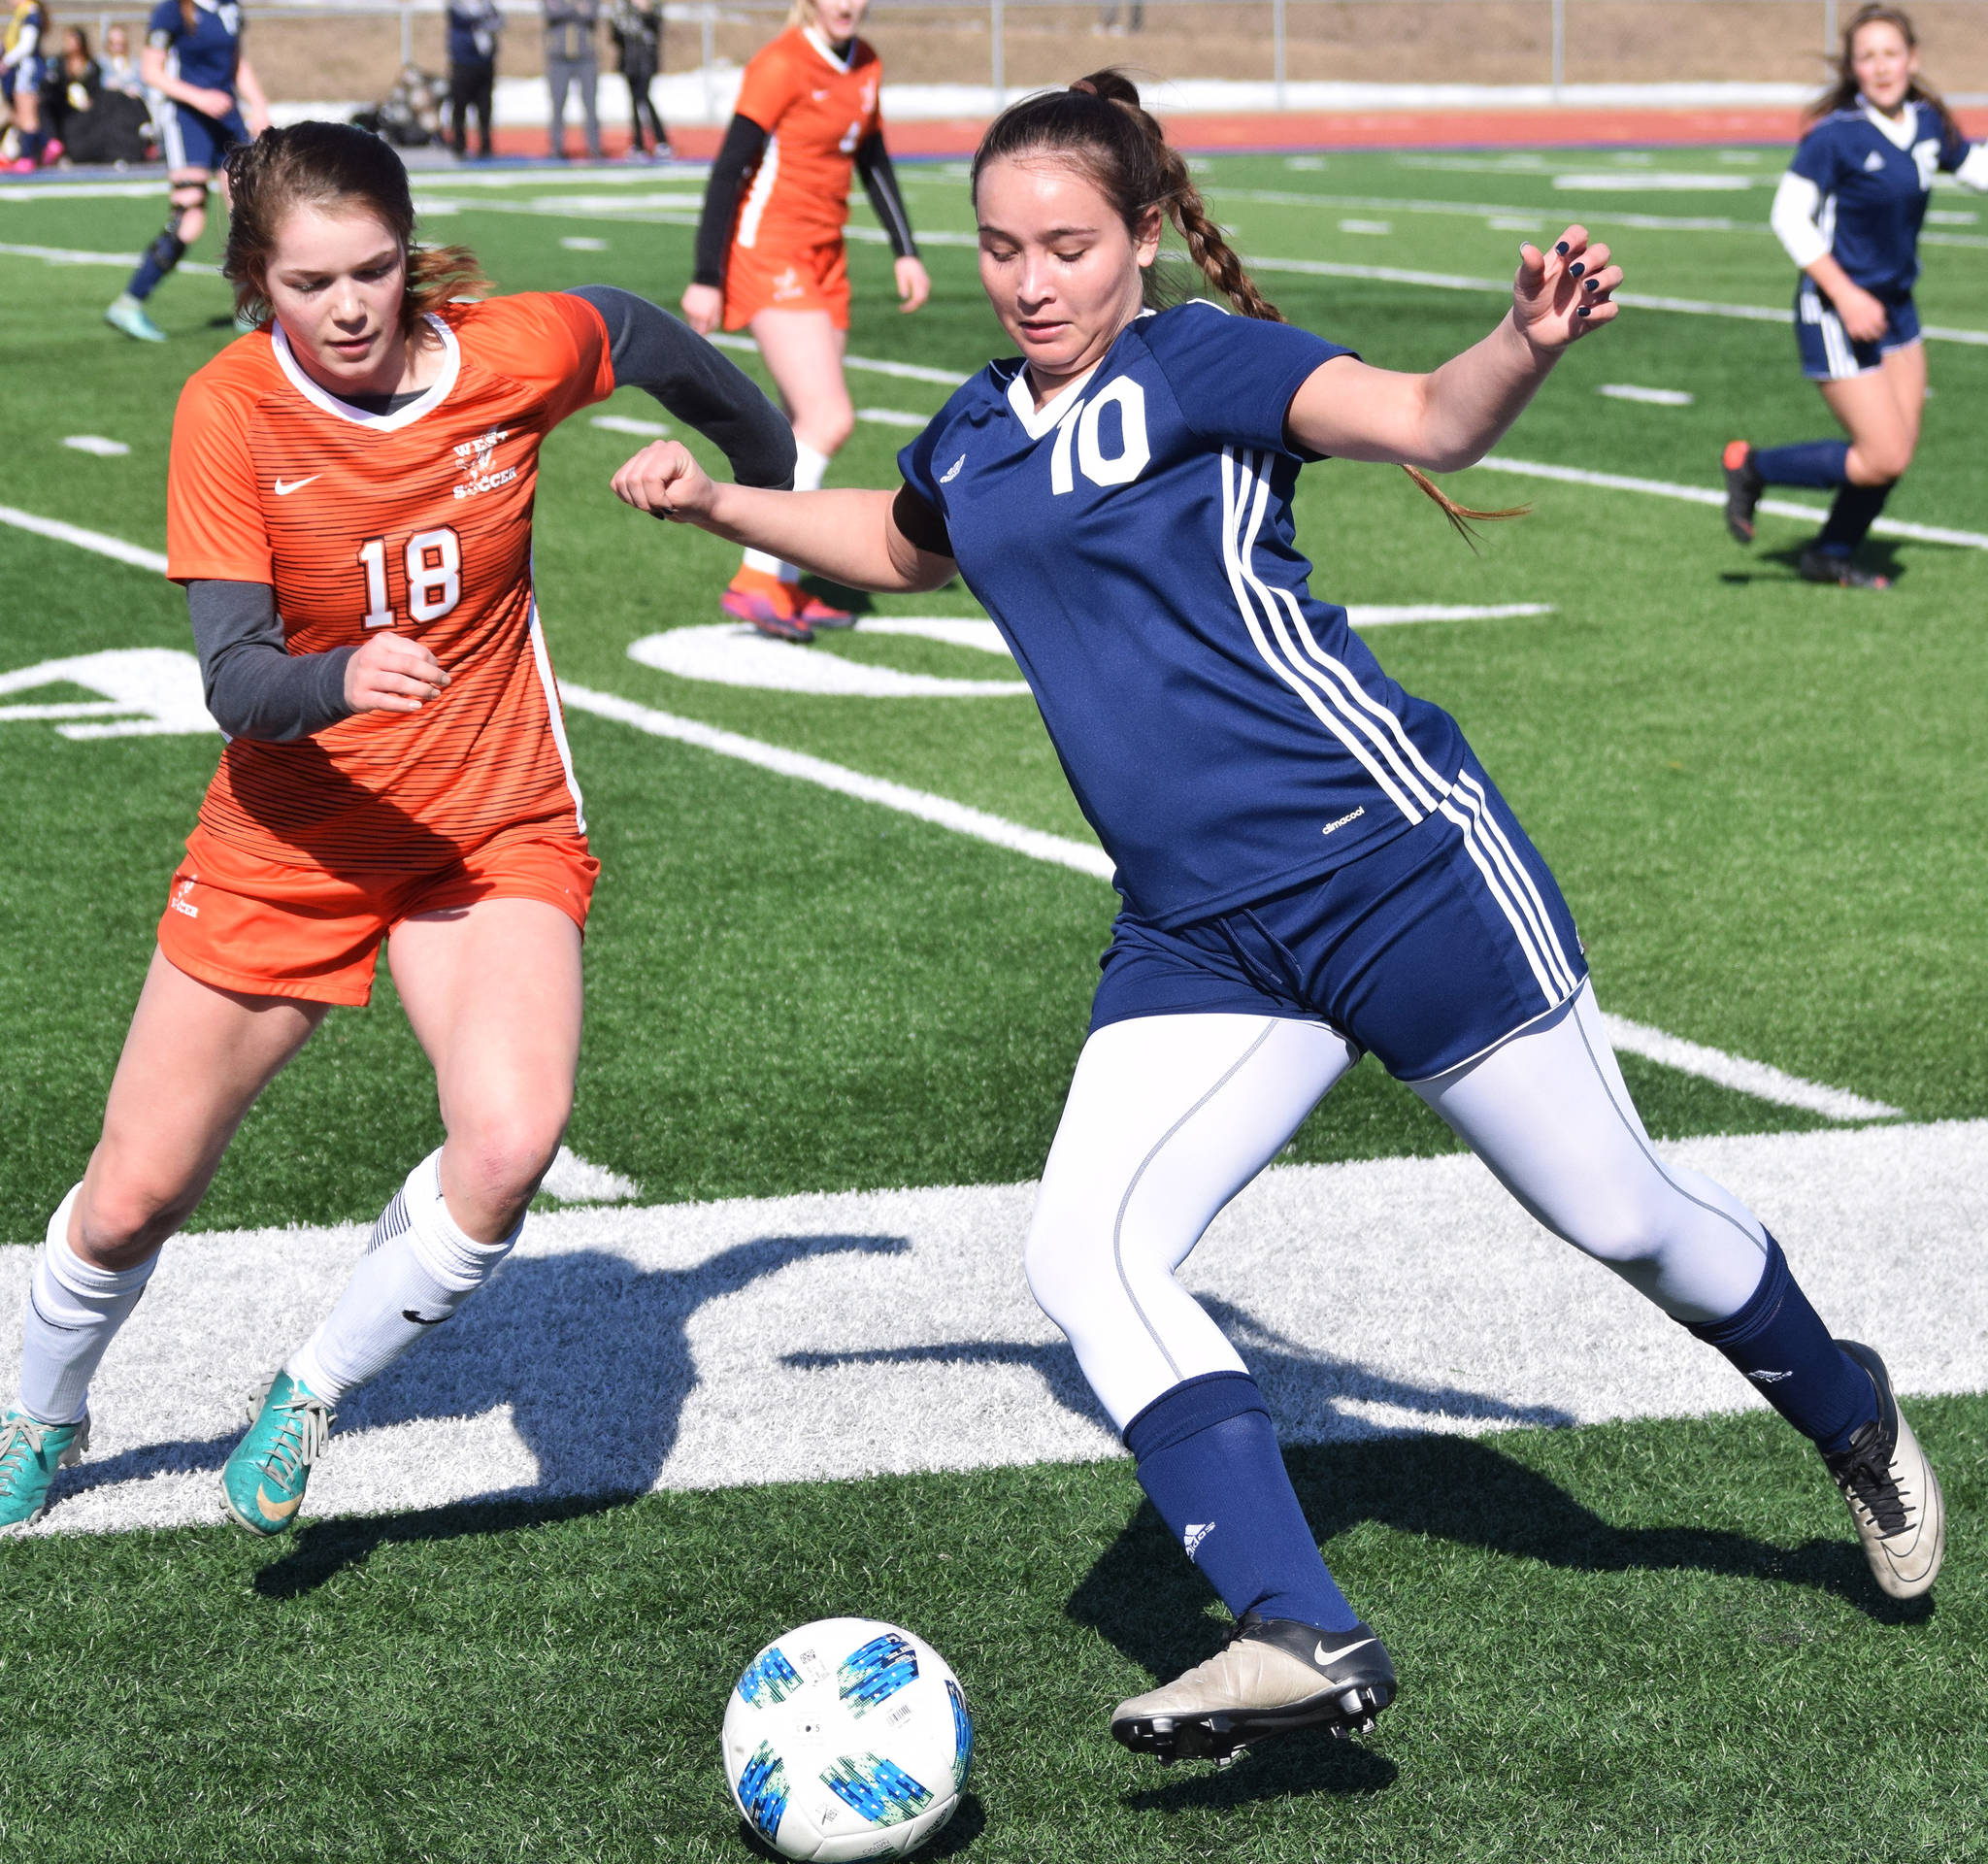 Soldotna’s Sierra Longfellow (10) races to the ball ahead of West’s Beatrix Brudie Friday, April 5, 2019, in a nonconference contest at Soldotna High School. (Photo by Joey Klecka/Peninsula Clarion)